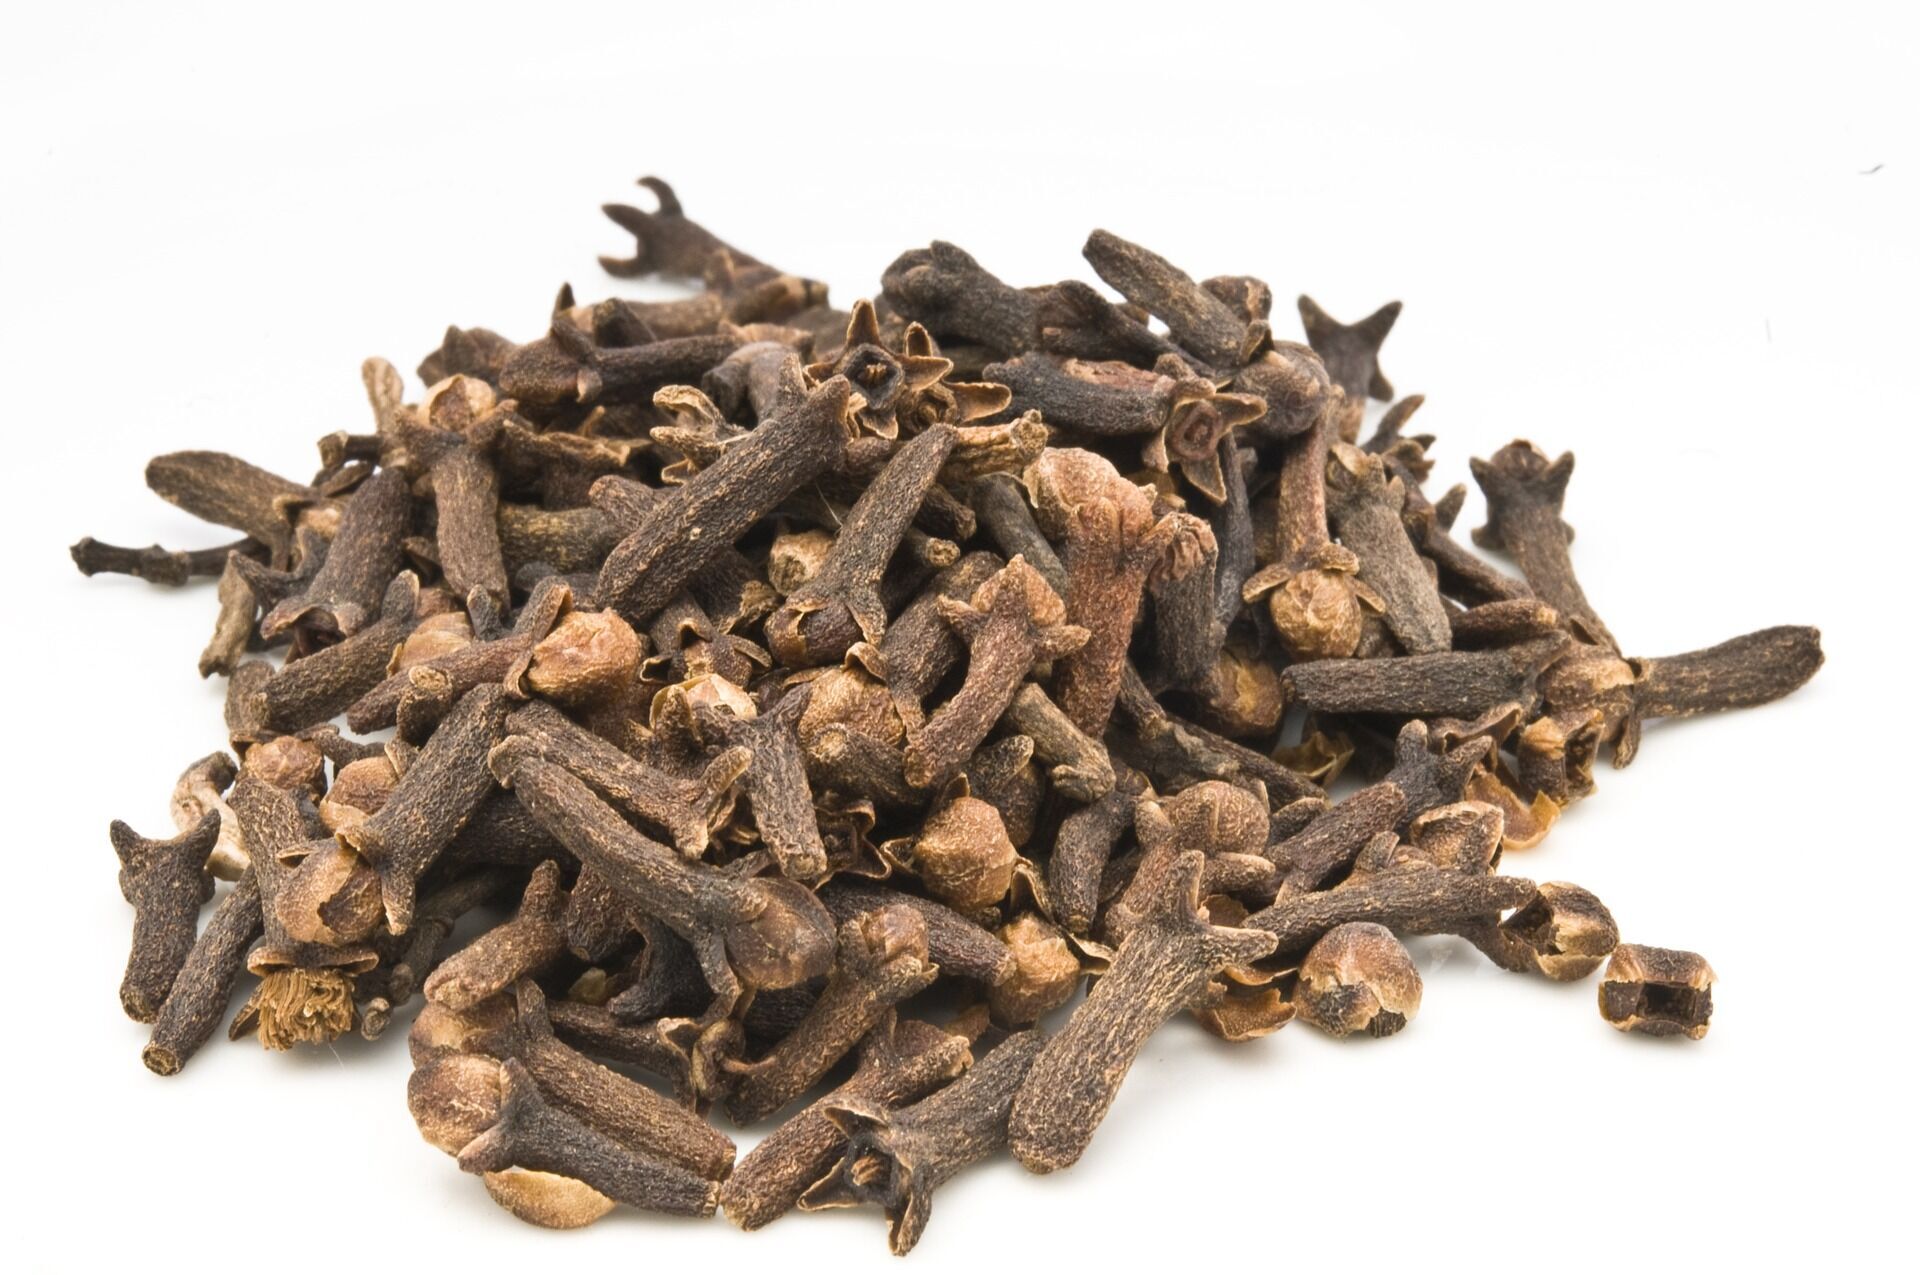 Cloves can lower blood pressure